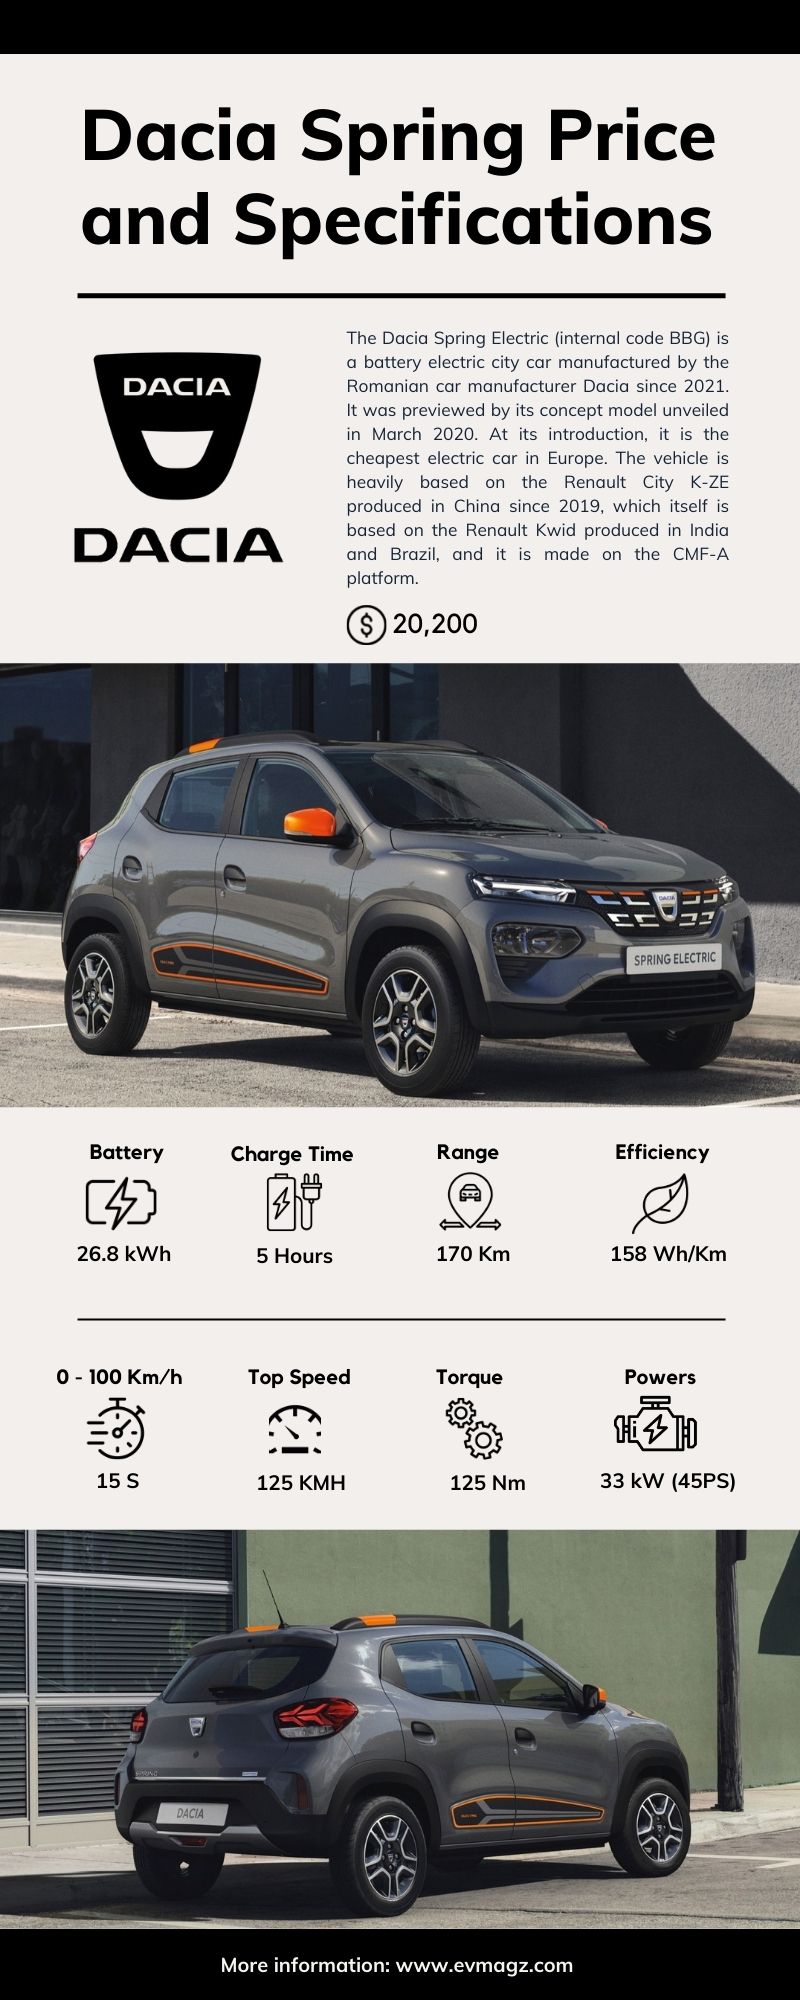 Dacia Spring Price and Specifications [Infographic]